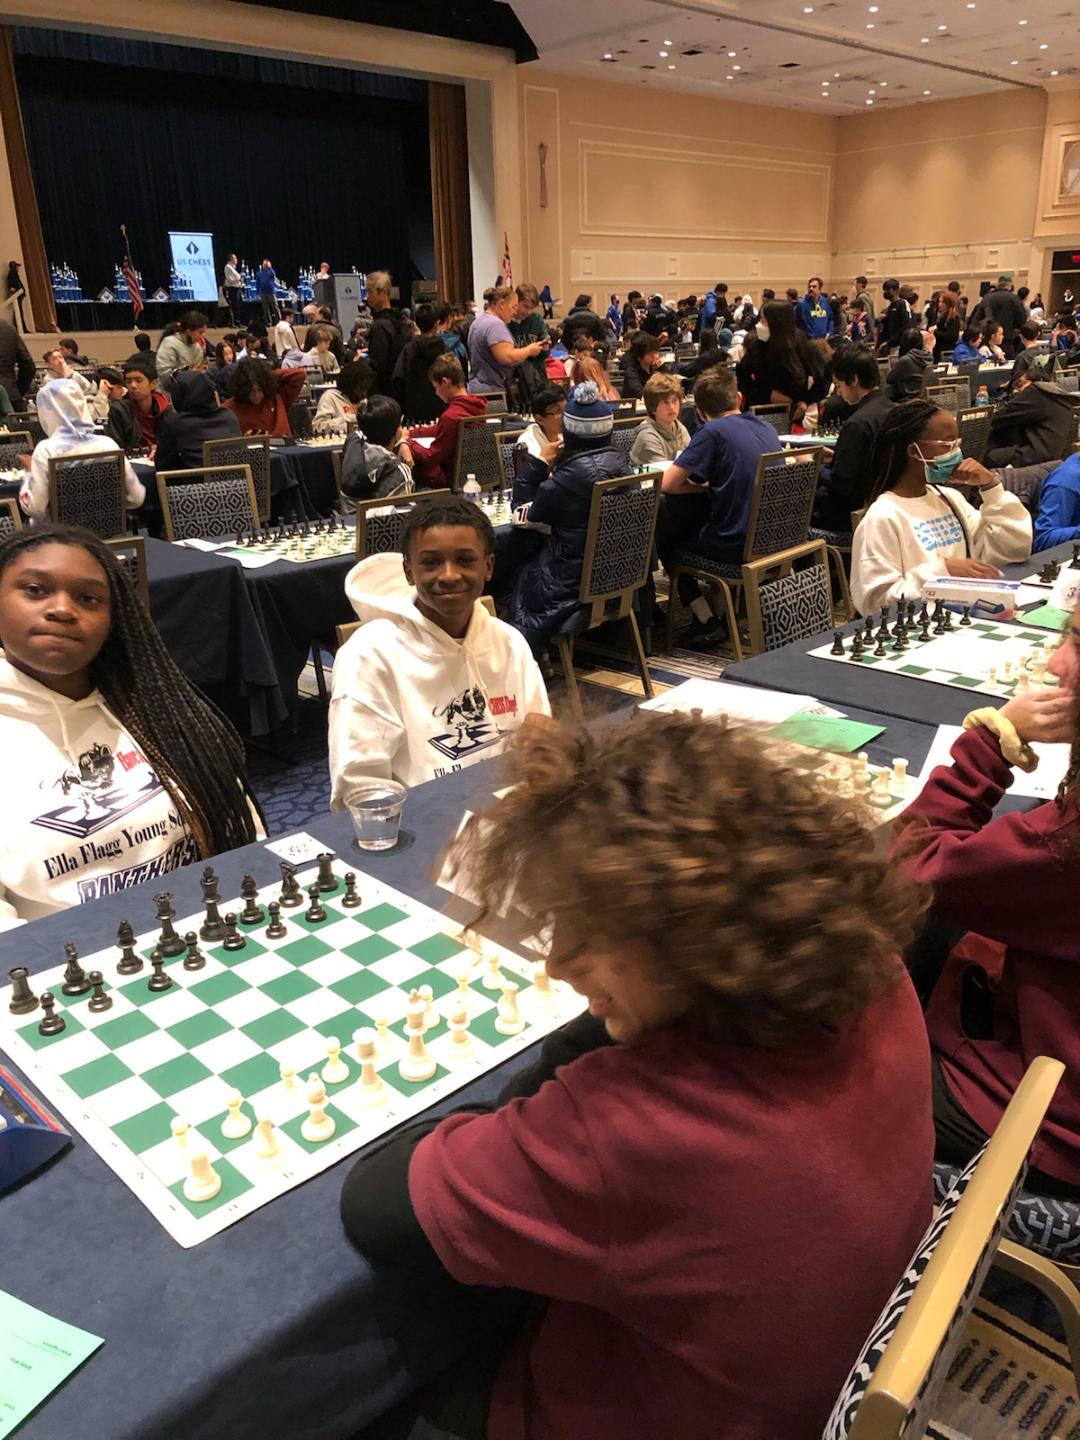 JOSEPH OCOL TEACHES middle school at the Ella Flagg Young Elementary School, 1434 N. Parkside Ave., Chicago, IL, where he has begun a chess club for disadvantaged Black seventh and eighth grade students. On Saturday, March 11, 2023, his students won second place during the CPS K-8 chess playoffs held at the Solorio Academy High School. Last month, his students ranked 10th place out of 60 schools and they were the only ones from CPS in the state tournament. They need funding to go to Washington, D.C. for the national competition.